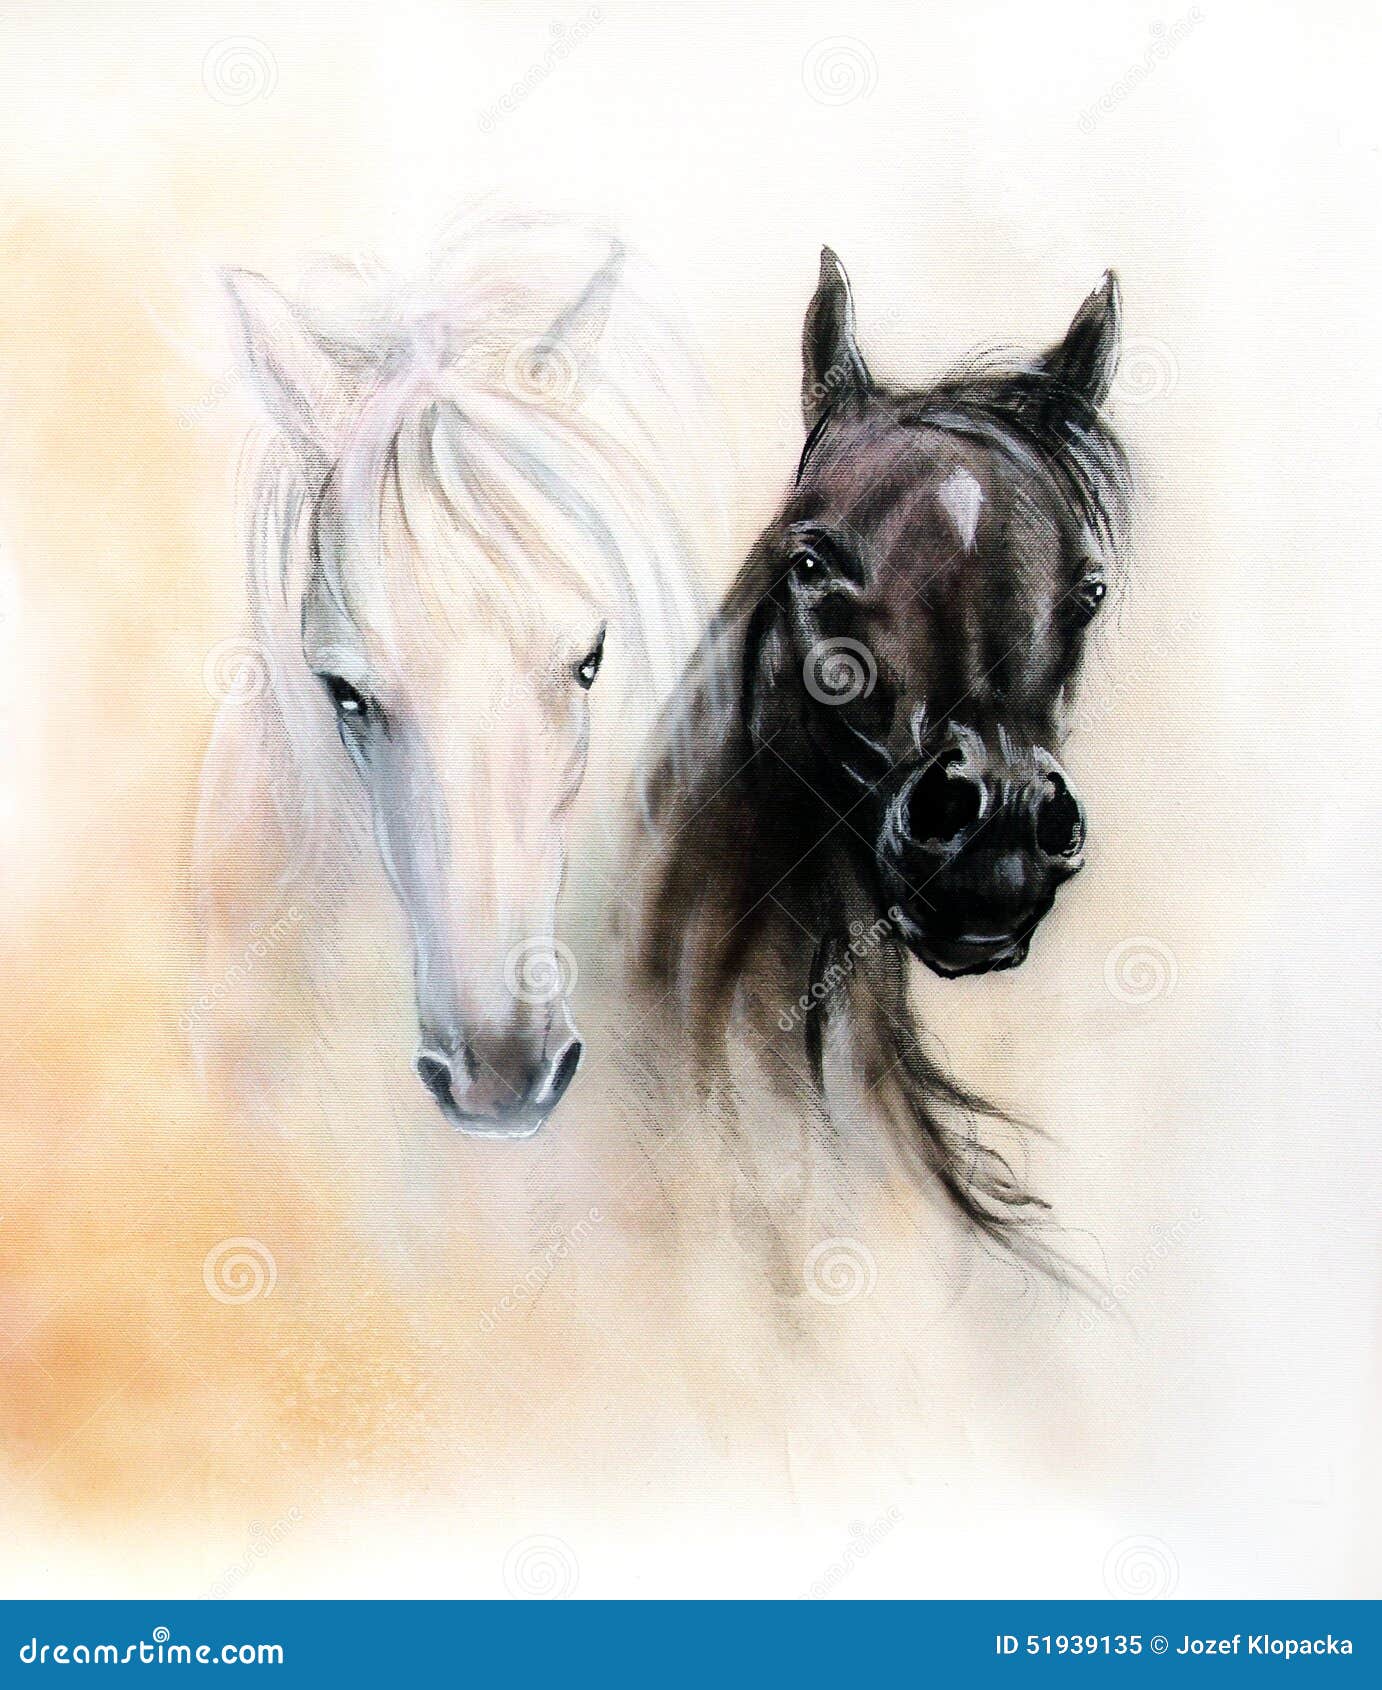 horse heads, two black and white horse spirits, beautiful detail